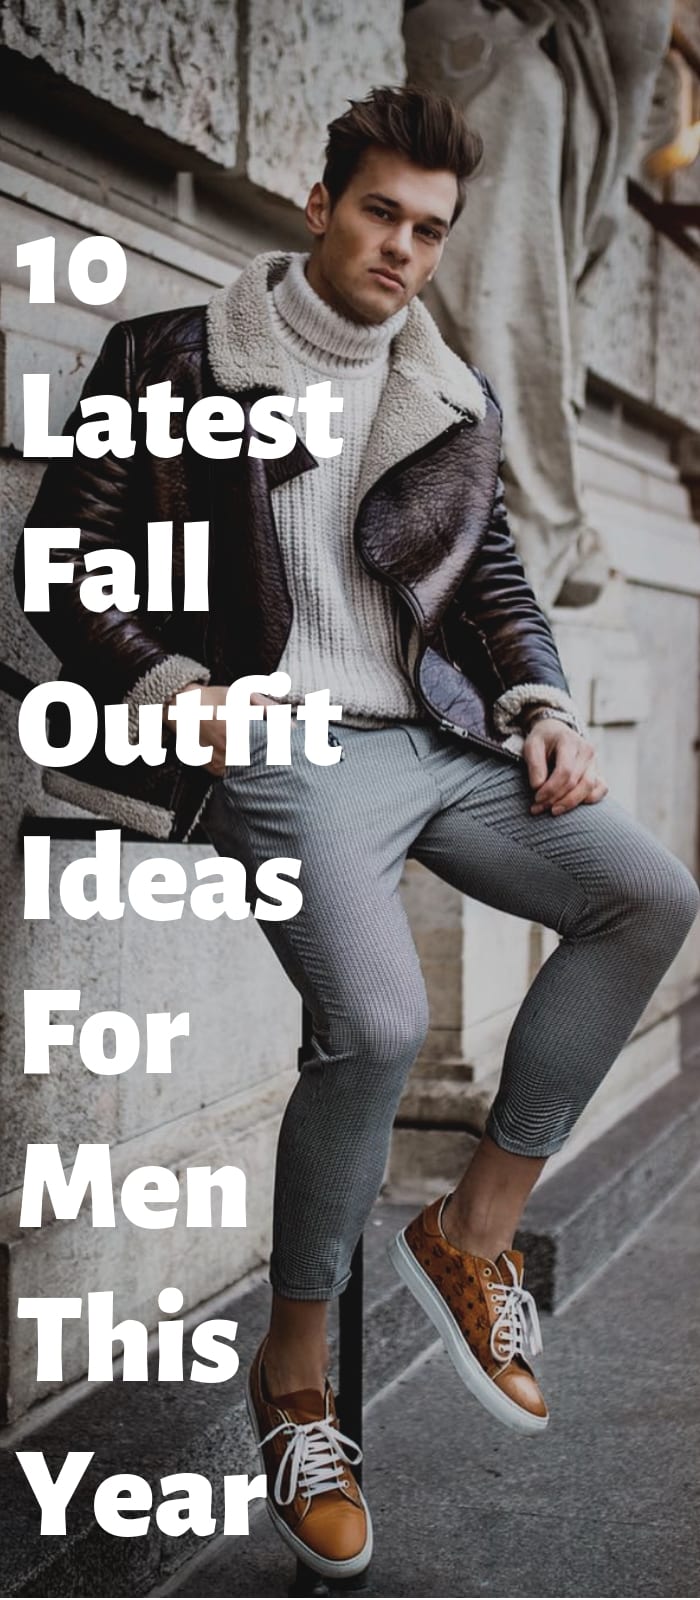 10 Latest Fall Outfit Ideas For Men This Year